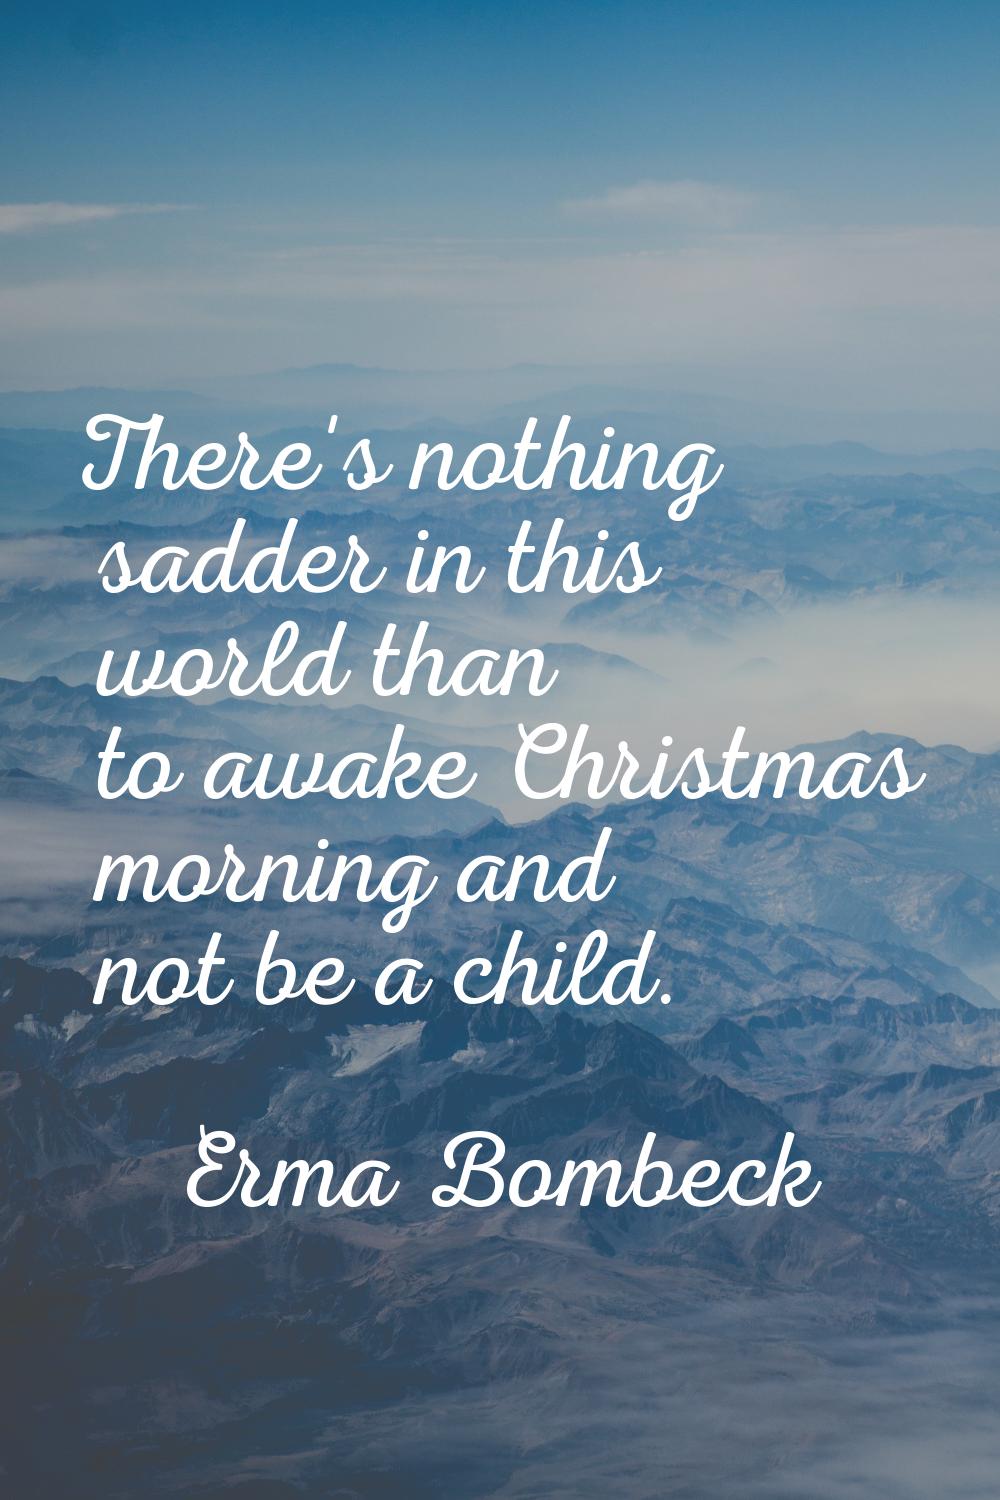 There's nothing sadder in this world than to awake Christmas morning and not be a child.